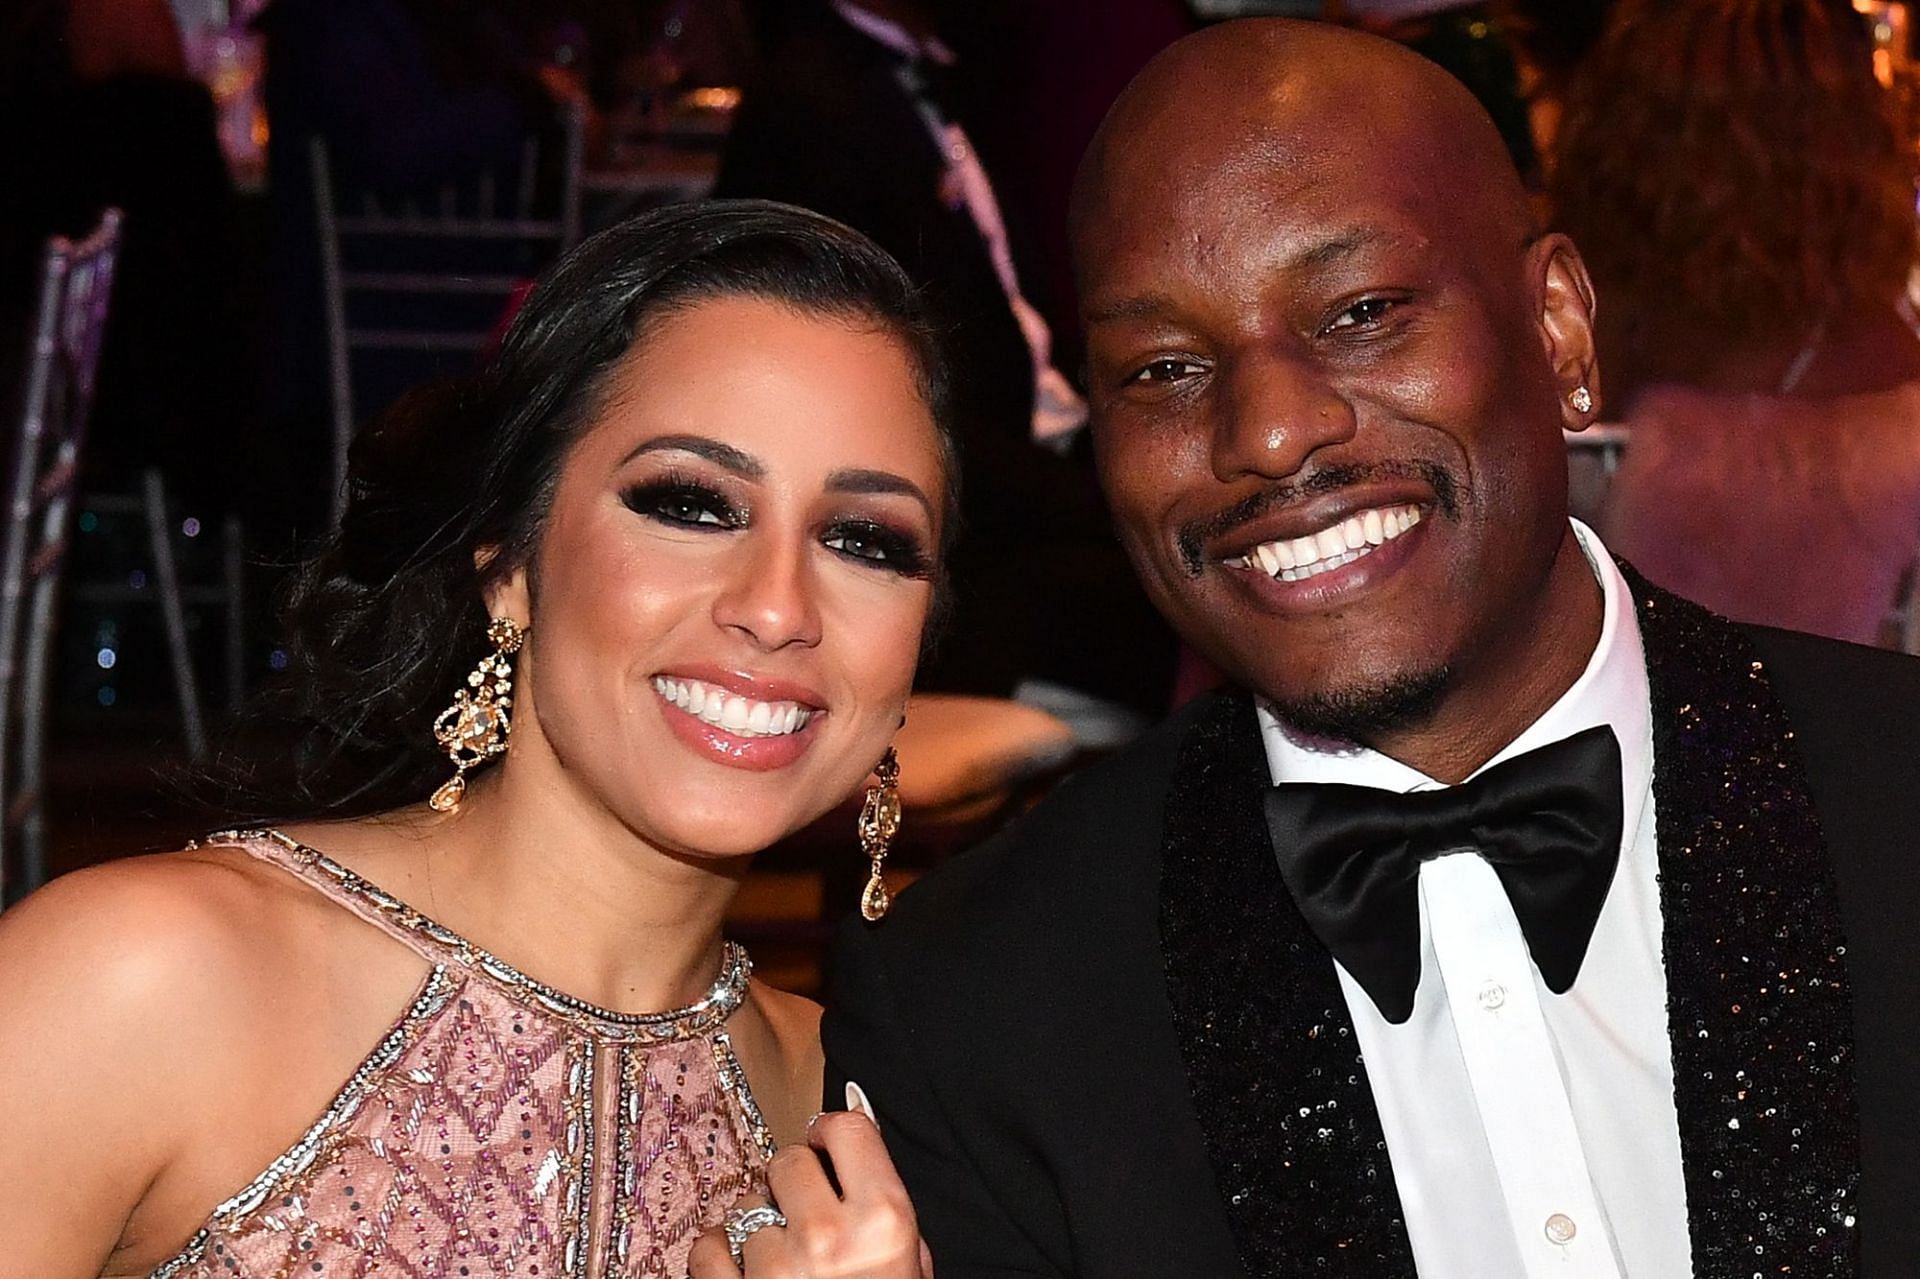 Details revealed about Tyrese